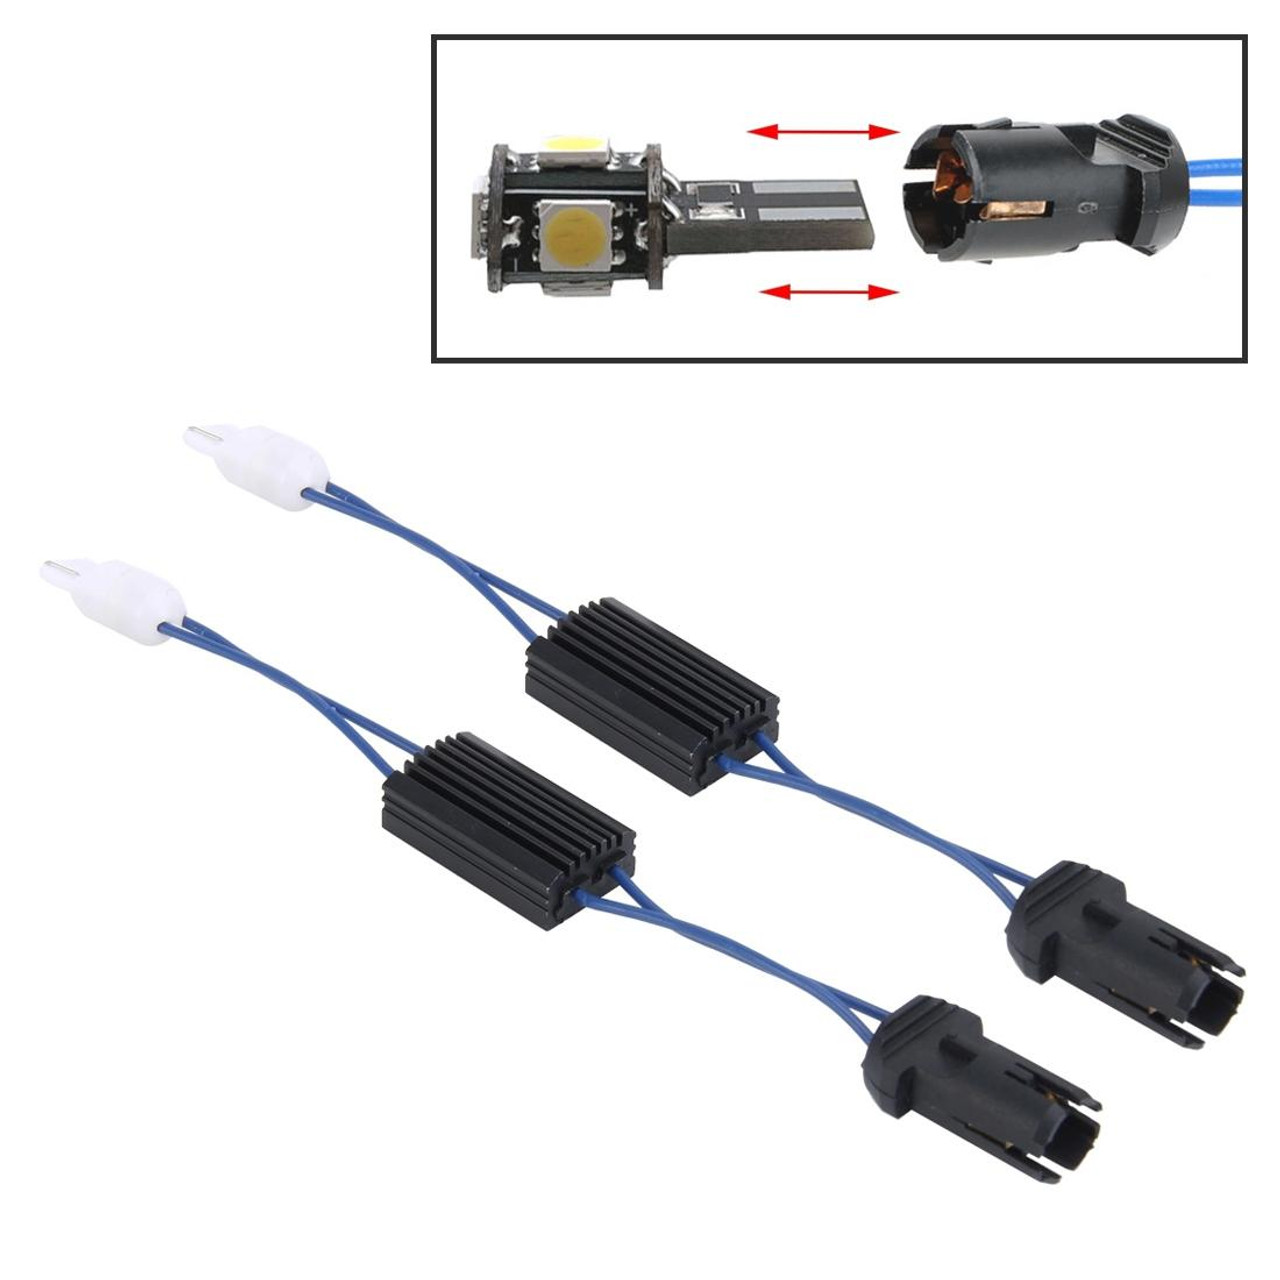 2 PCS T10 Car Auto Clearance Light Warning Error-free Decoder Adapter for  DC 12V/3W, snatcher